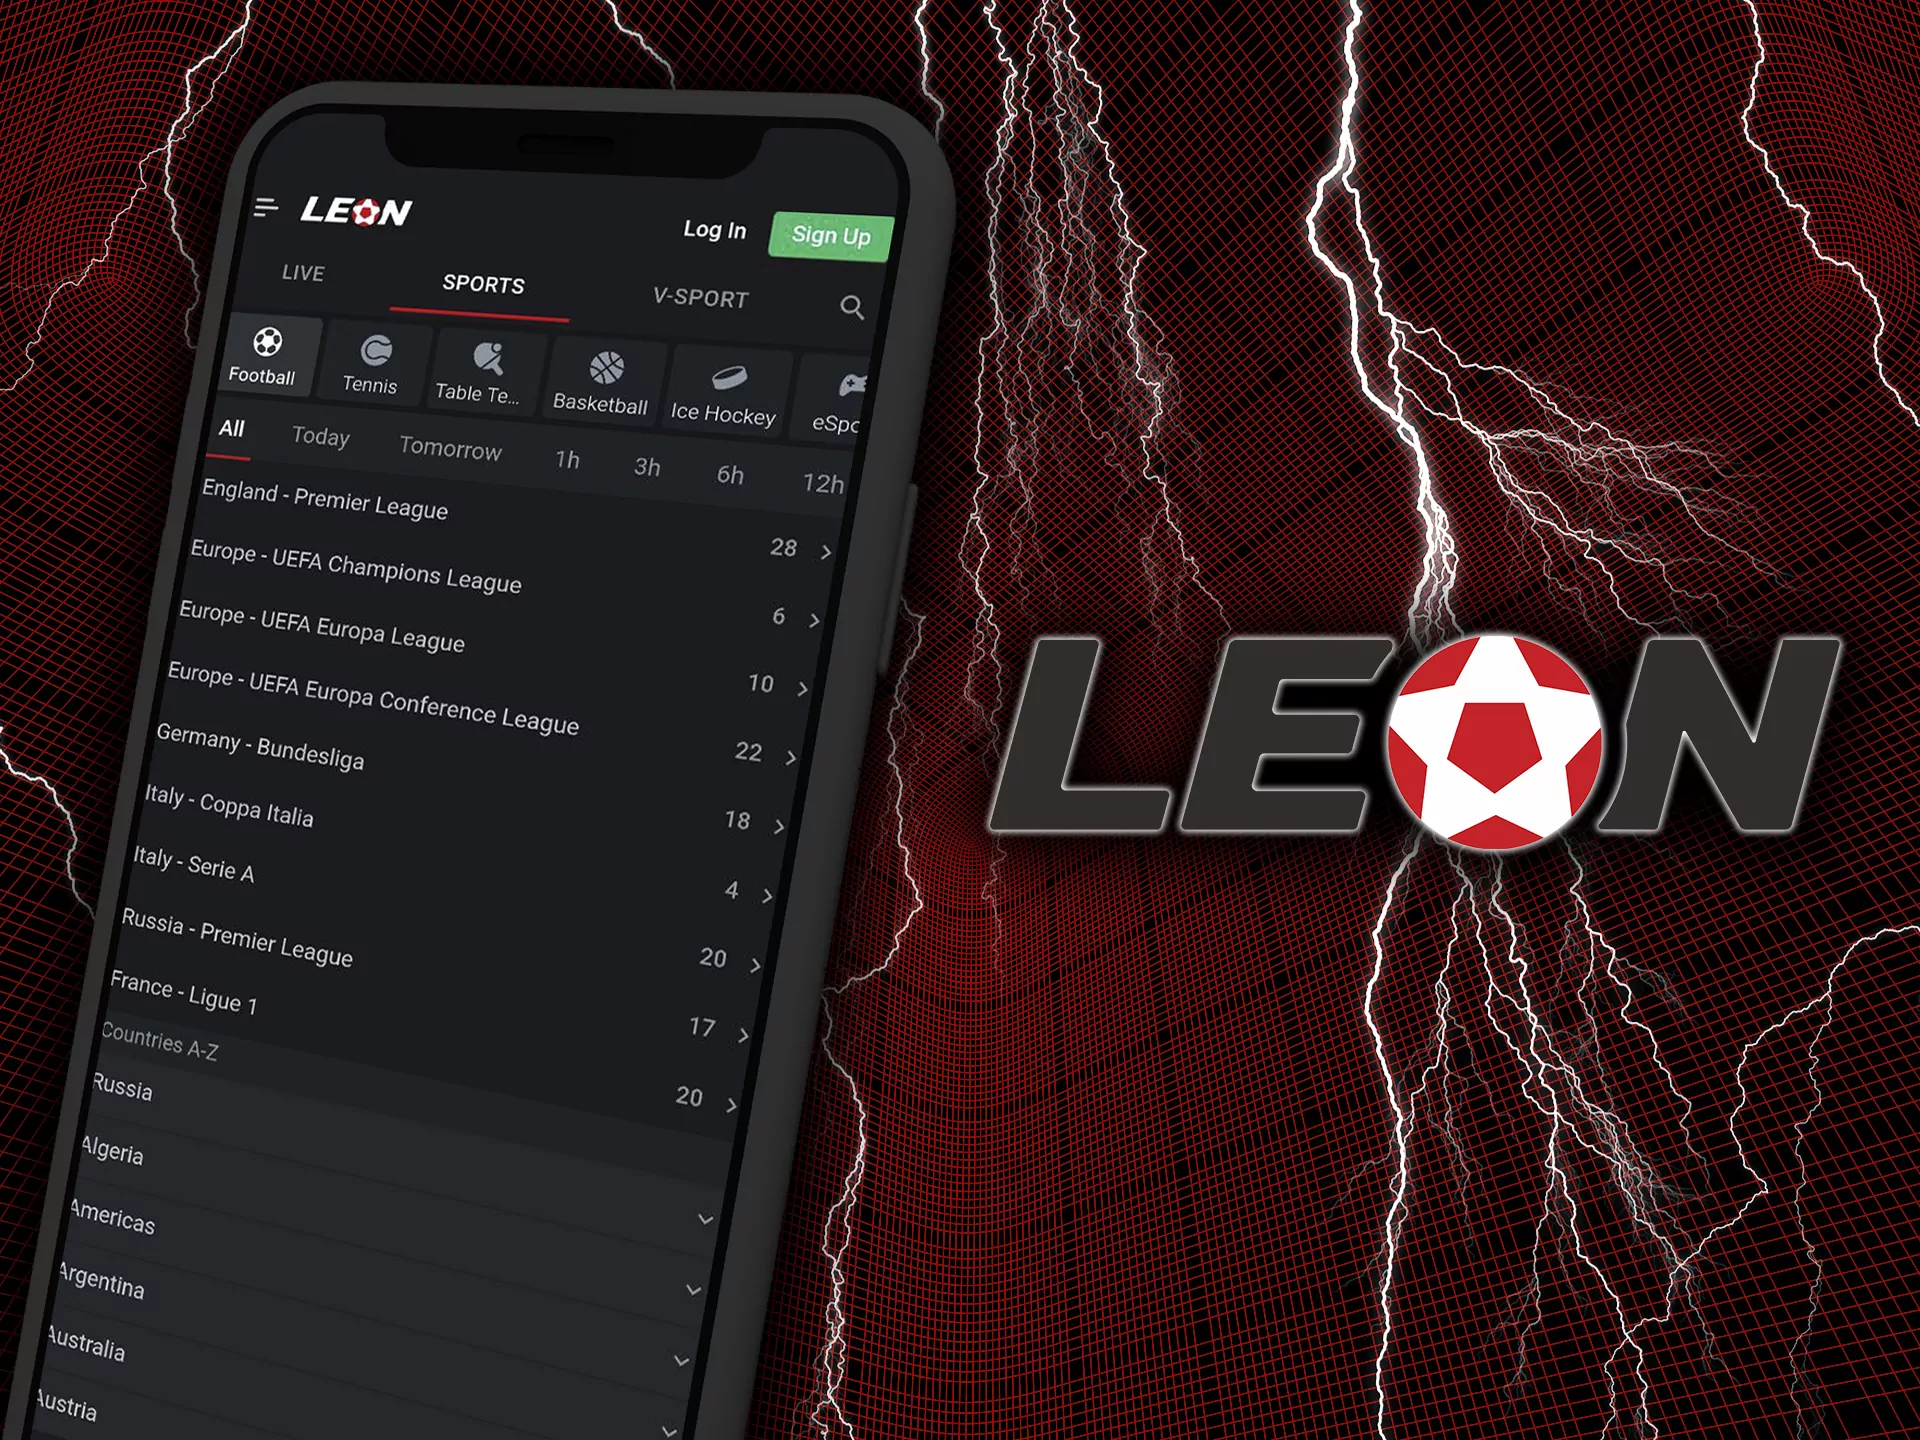 Leon app is a handy way to bet whenever you want.